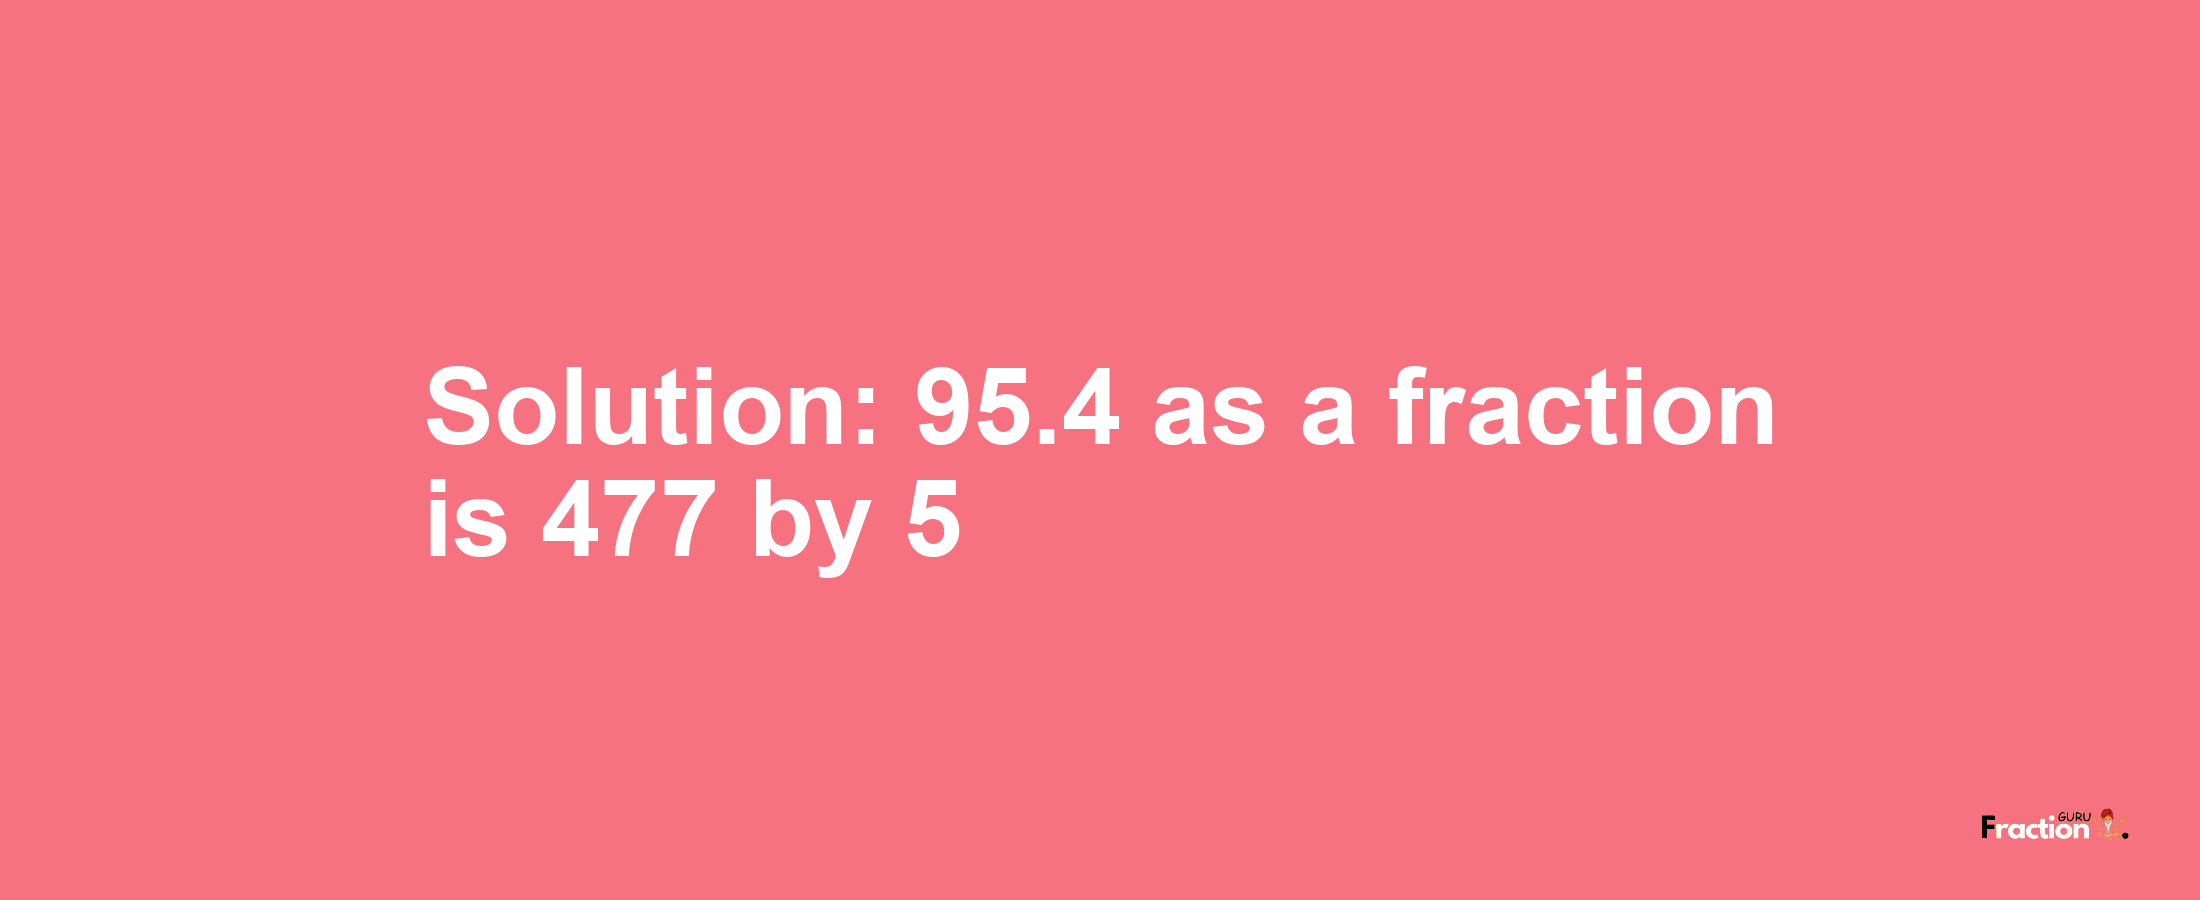 Solution:95.4 as a fraction is 477/5